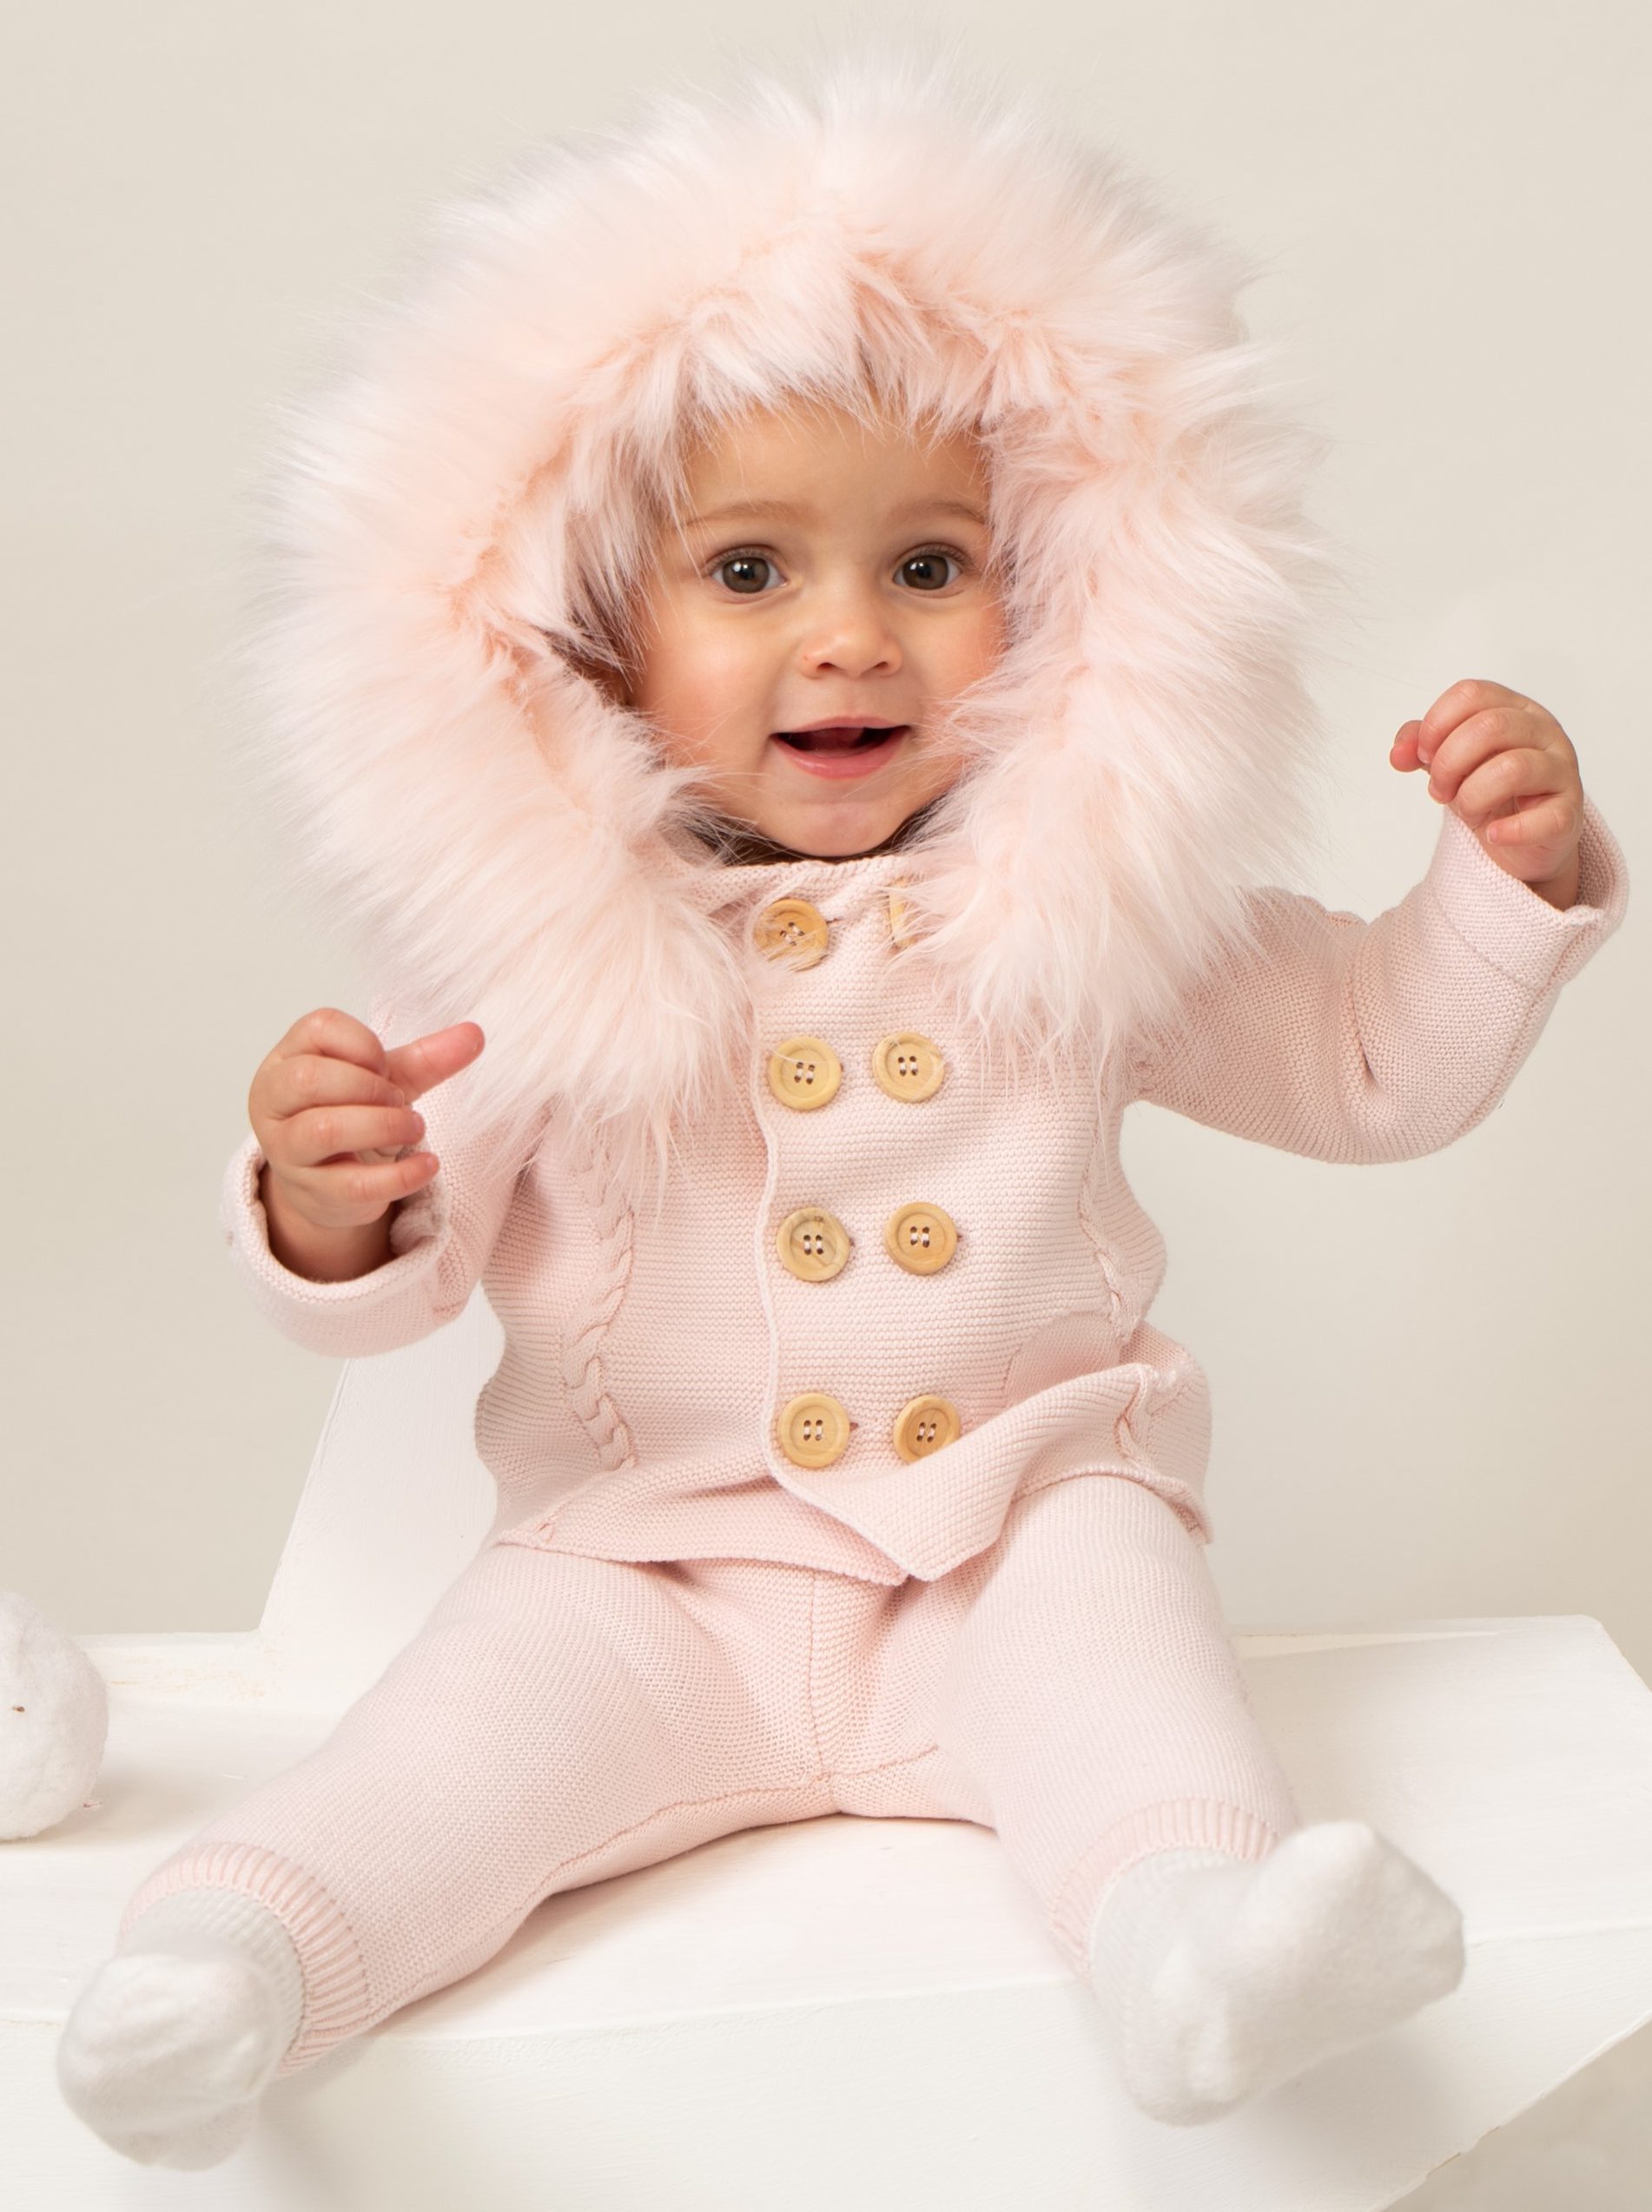 Baby Girls 2 piece knit heart set by Caramelo Kids – Pink Or Ivory